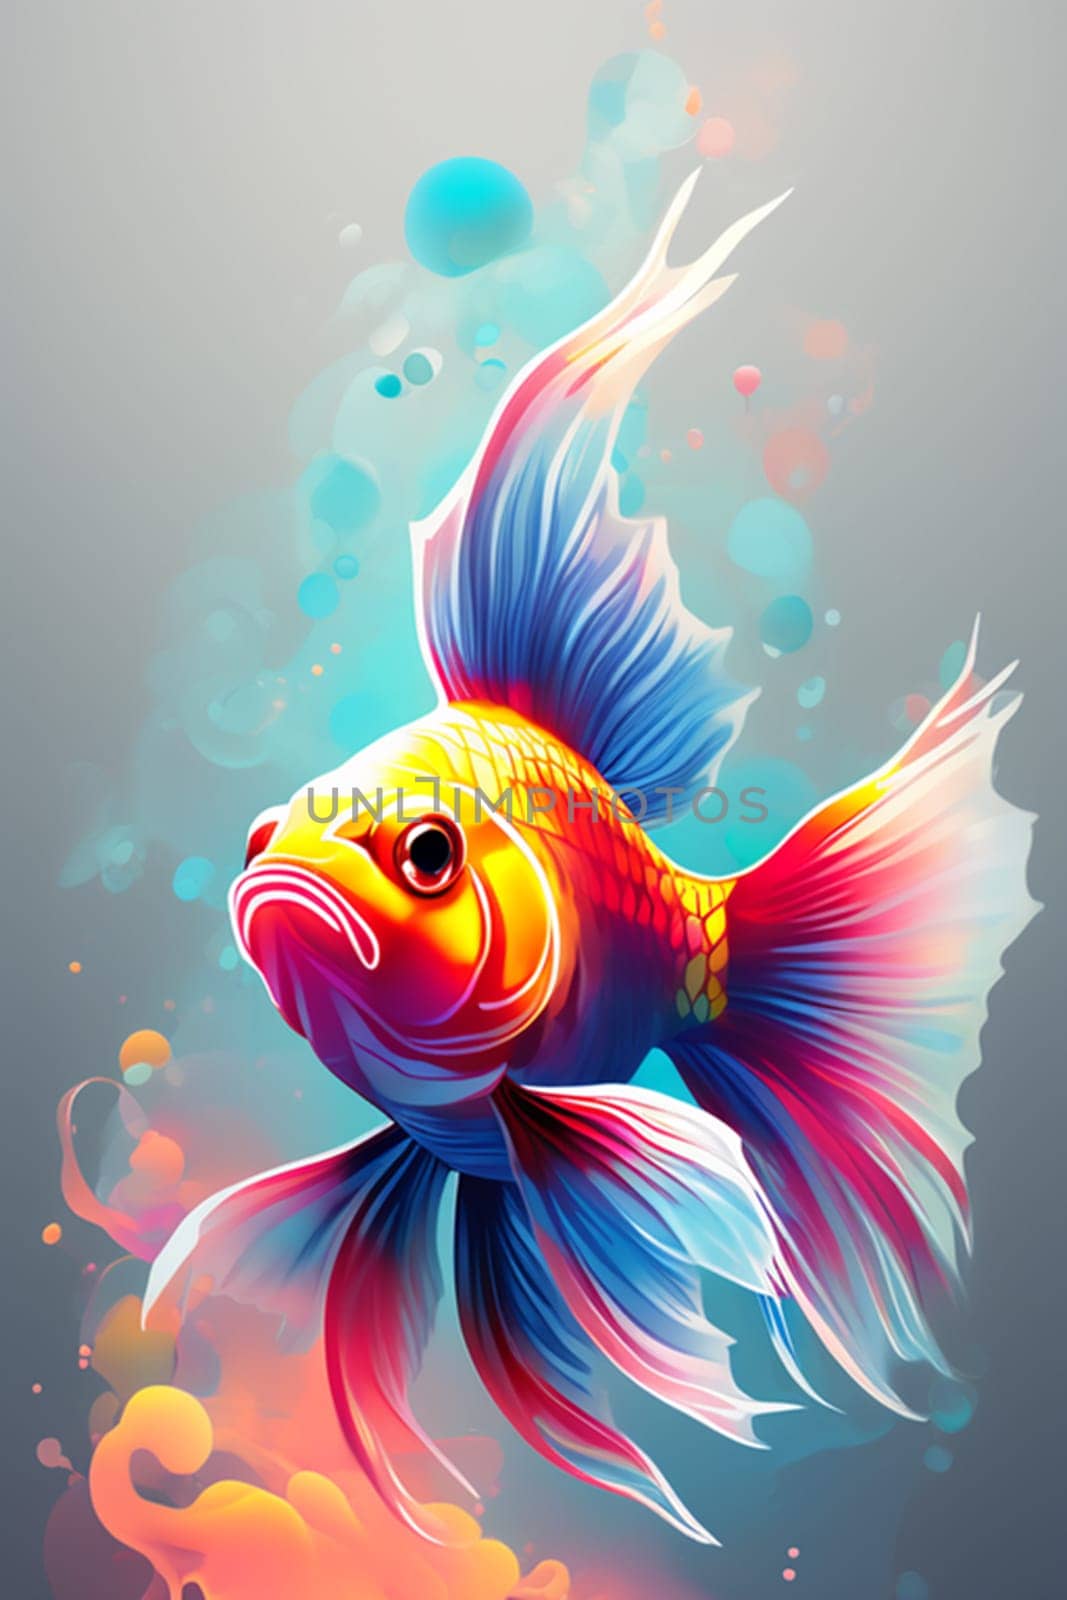 Goldfish in neon color in pop art style. Minimalist style, neon line logo, depicting a mosaic fish surrounded by vibrant smoke effects.